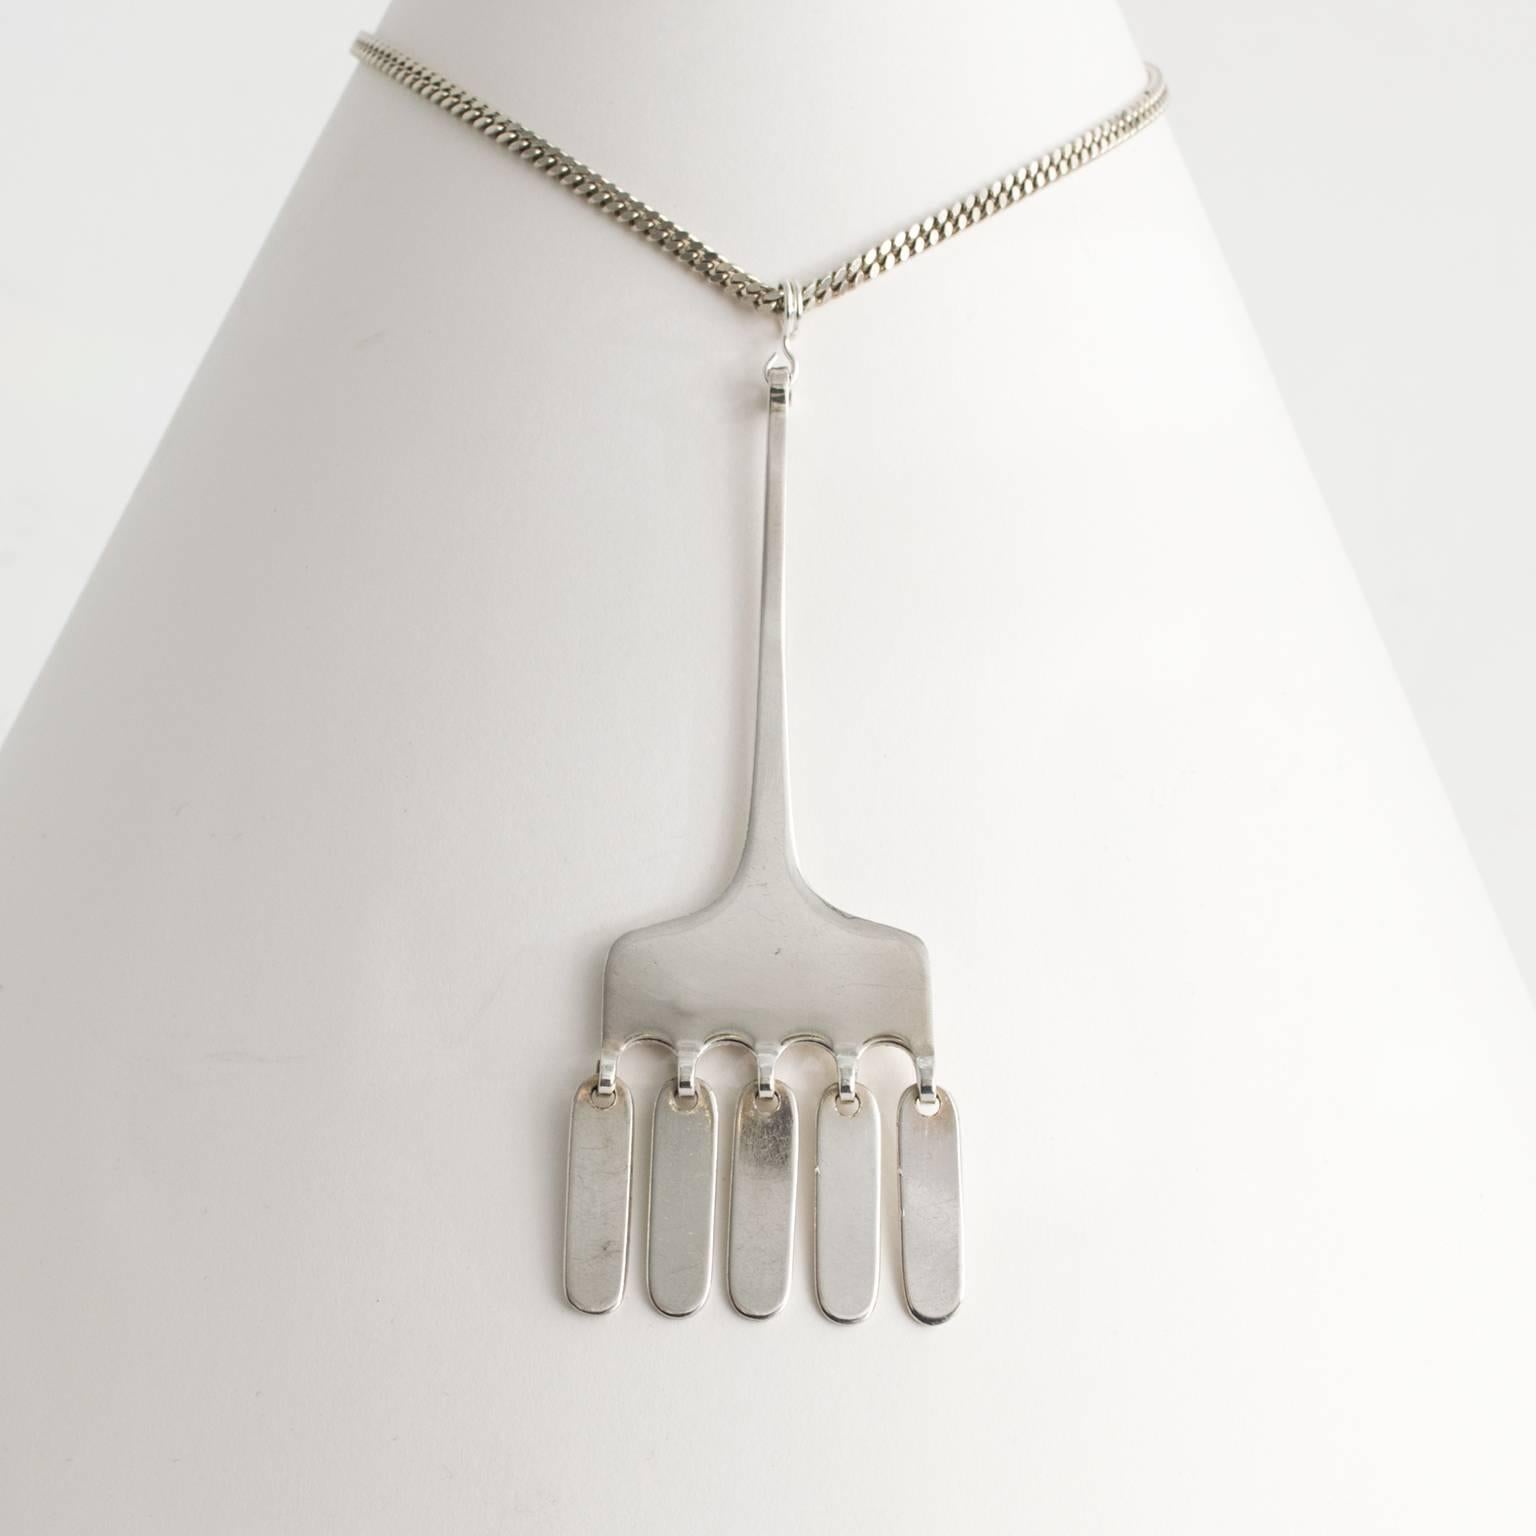 Silver Scandinavian Modern "MEMA" pendant with five capsule shaped elements on a silver chain. From Lidkoping, Sweden, 1972.
 
Chain length: 27"
Pendant height: 3".